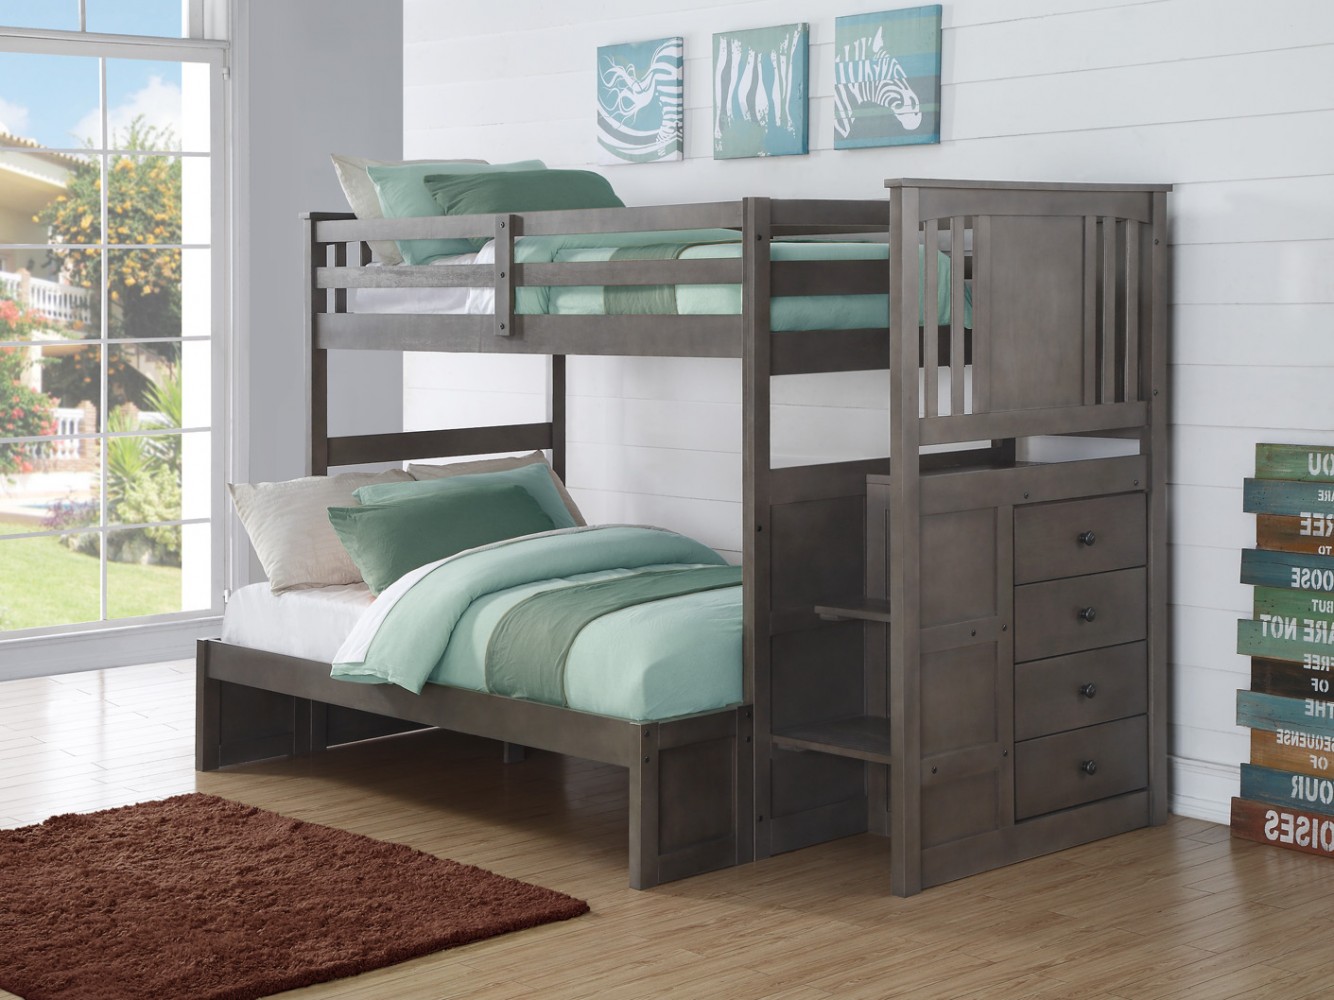 Donco Trading Company Slate Grey Twin/Full Bunk Bed